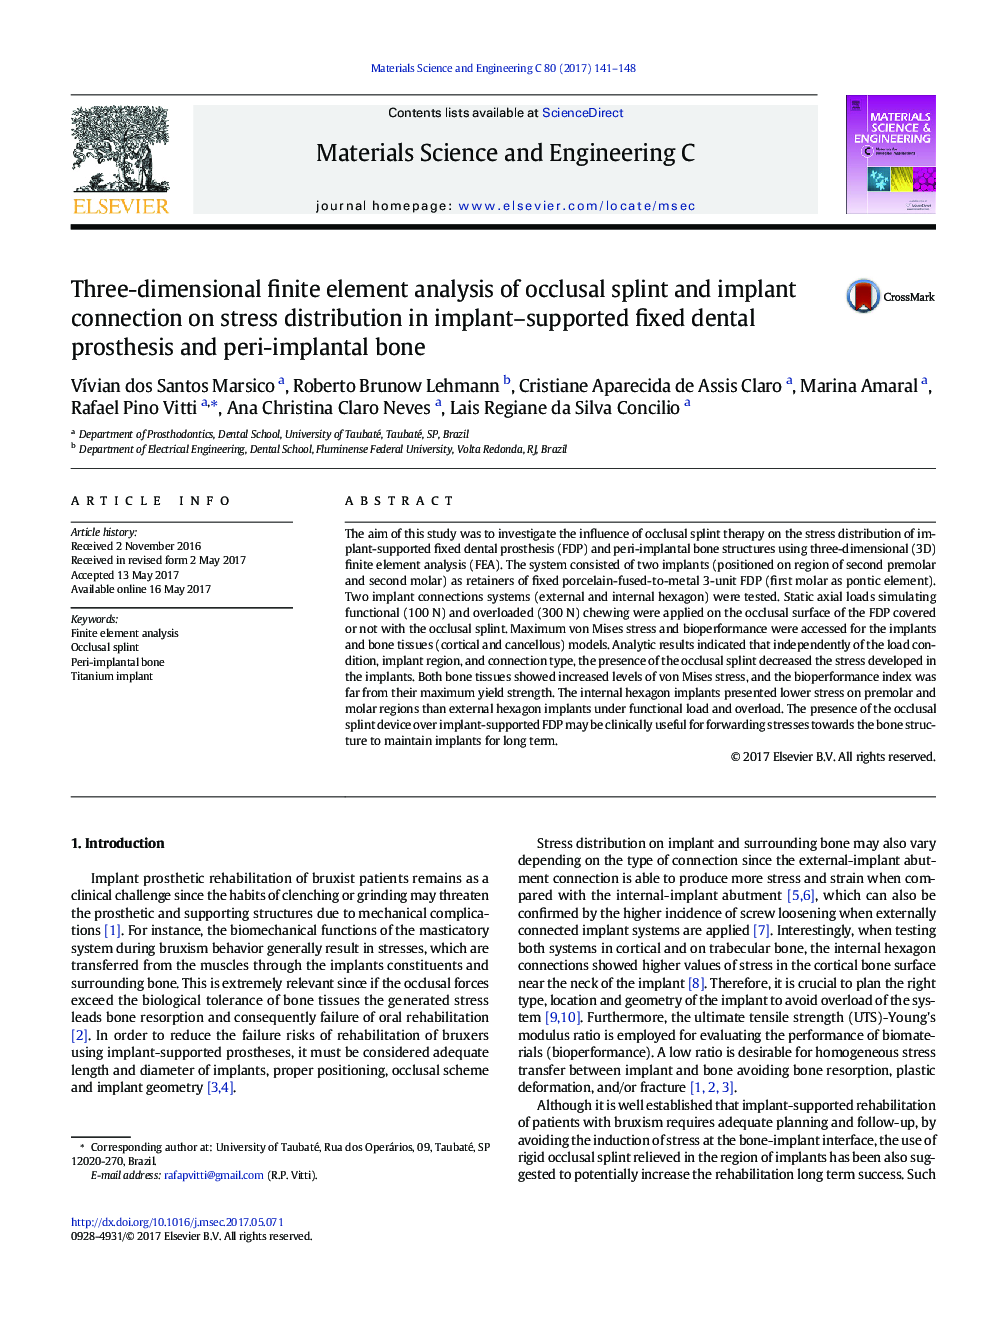 Three-dimensional finite element analysis of occlusal splint and implant connection on stress distribution in implant-supported fixed dental prosthesis and peri-implantal bone